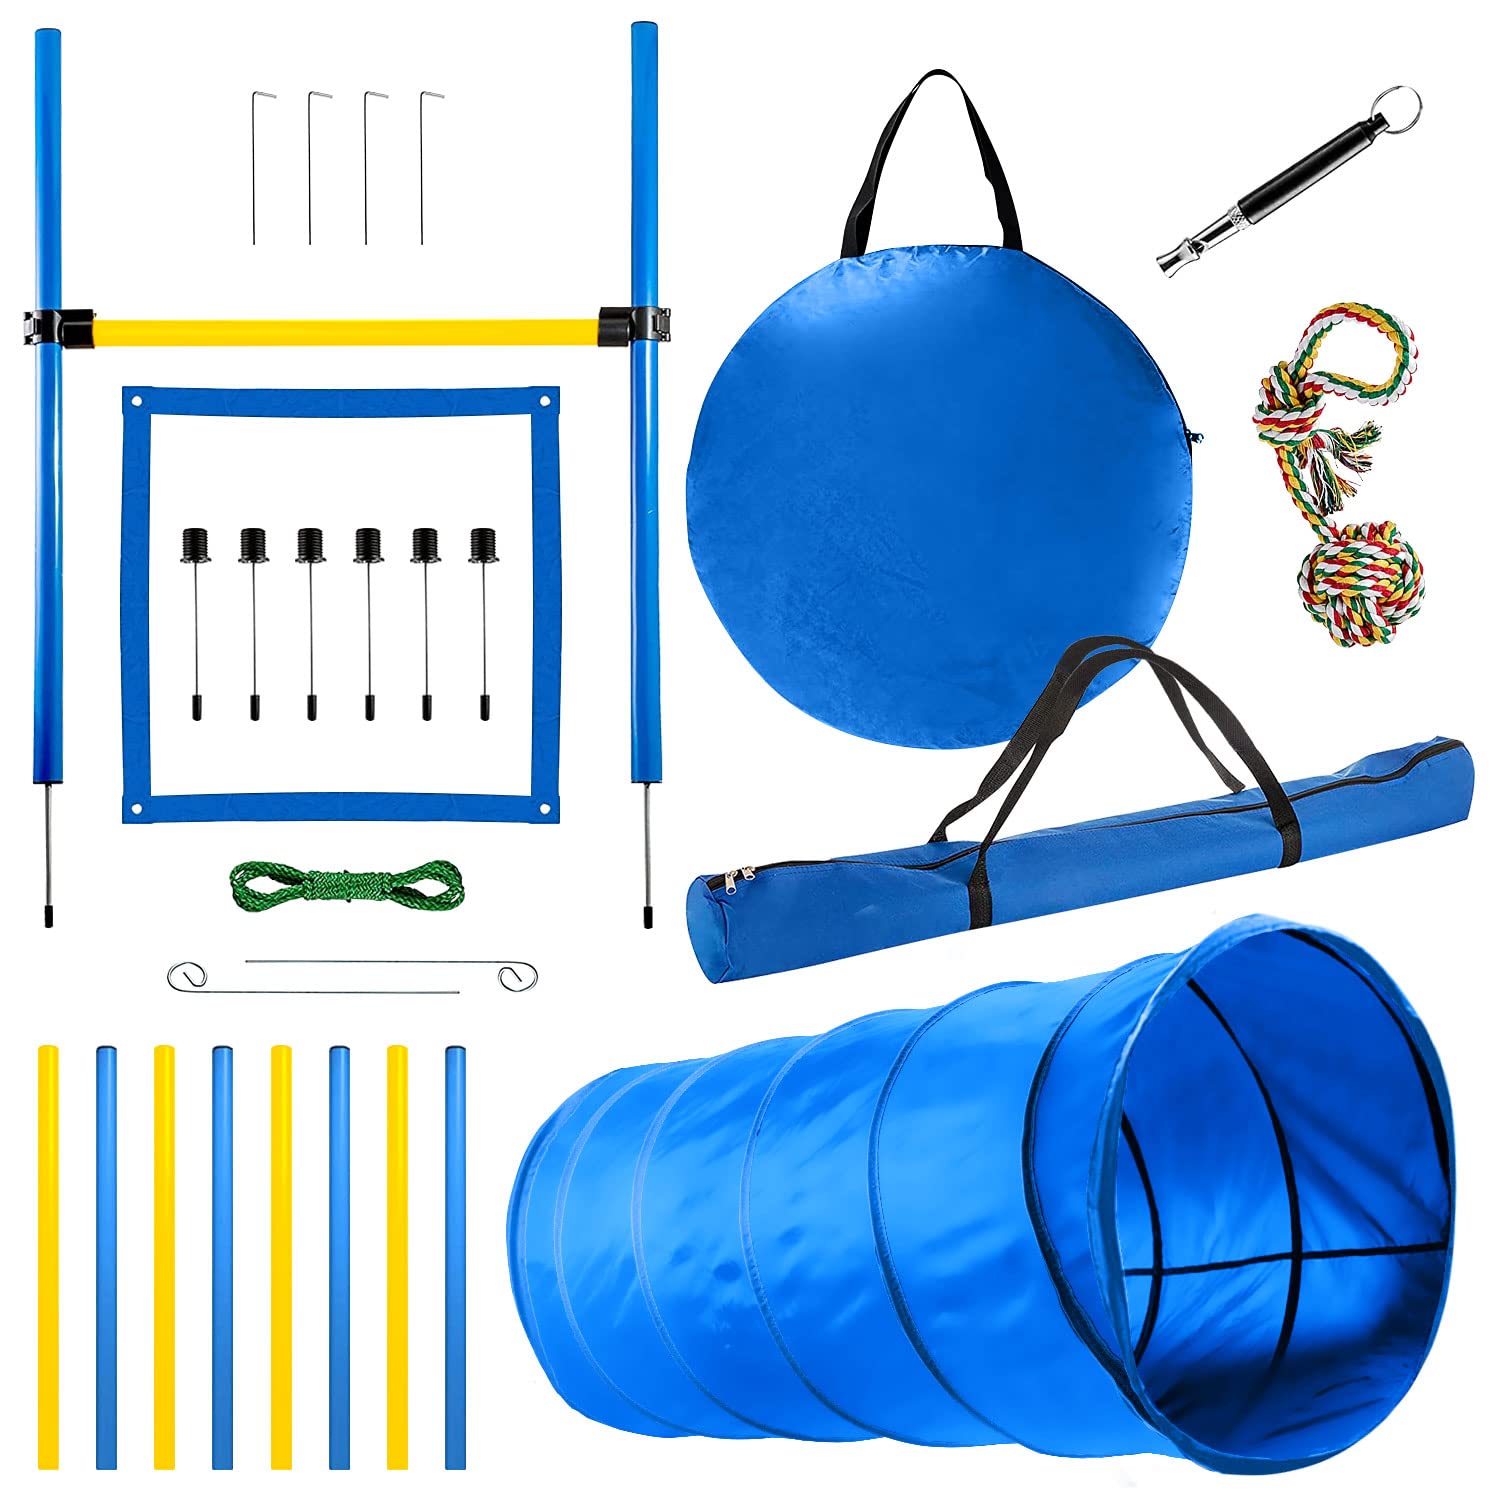 CHEERING PET Dog Agility Training Equipment, 28 Piece Dog Obstacle Course, Training and Interactive Play Includes Dog Tunnel, Adjustable Hurdles, Poles, Whistle, Rope Toy with Carrying Case  - Like New